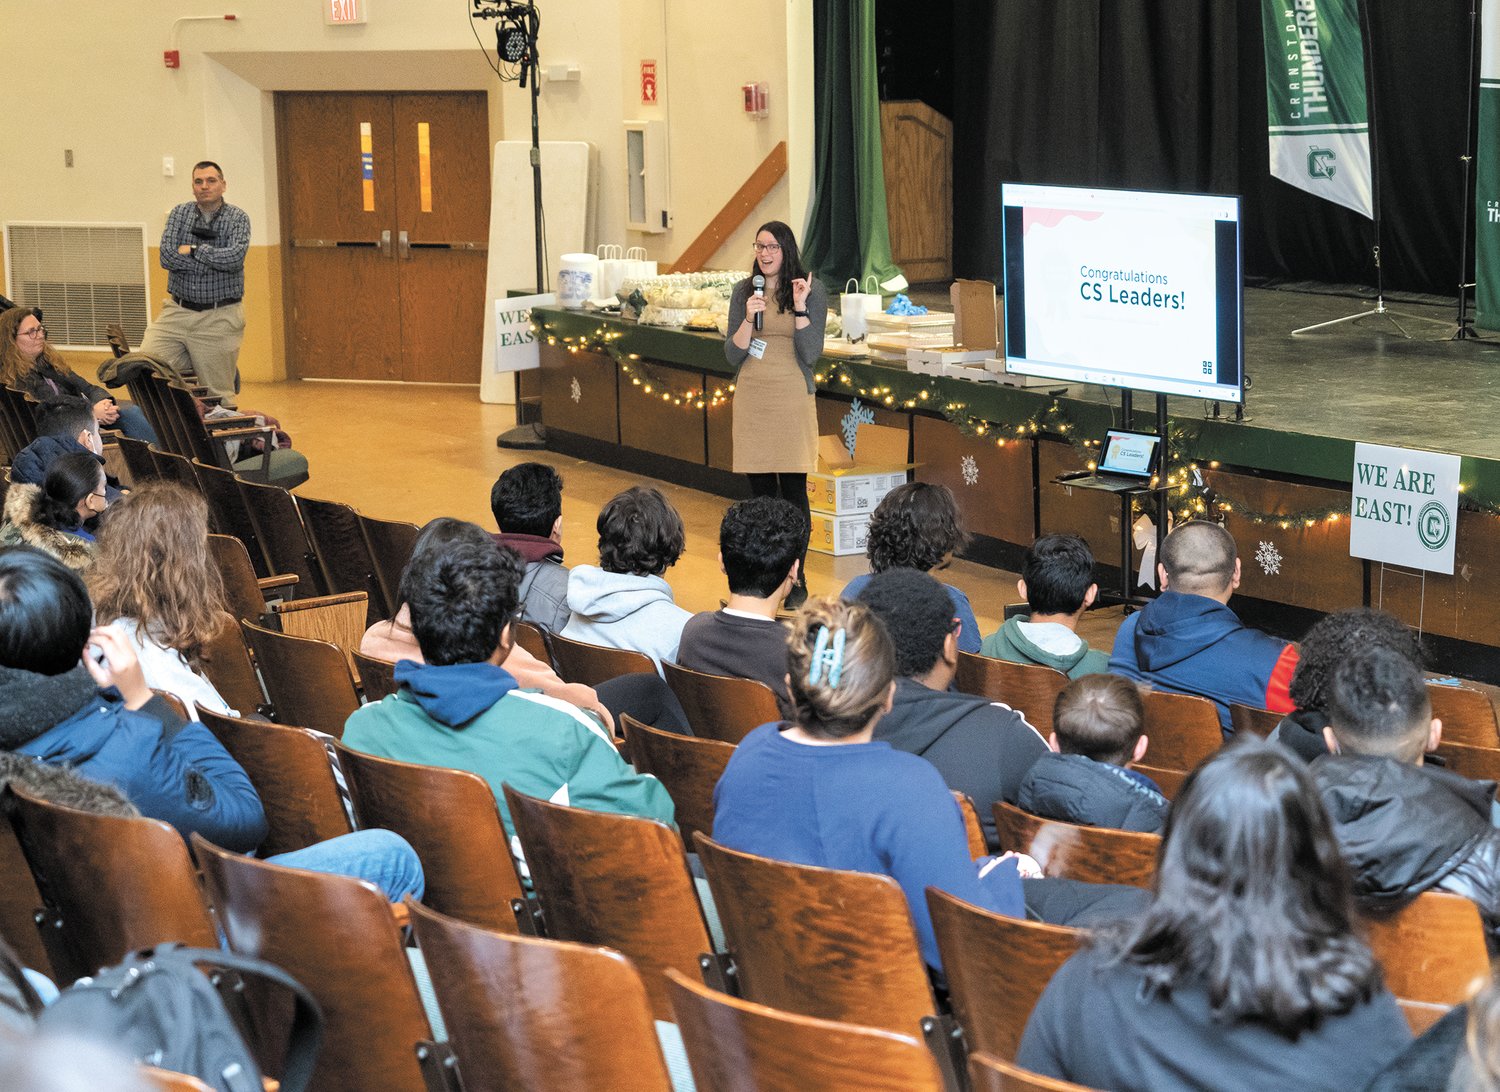 CONGRATS: Code.org's Director of Policy, Hannah Weissman, addressed and congratulated Cranston East students for becoming the benefactors of a $10,000 prize awarded by Code.org on Dec. 14. One elementary and one secondary school from each U.S. state and territory were chosen for this prize, which will help further computer science education for underrepresented students. Cranston East will be instituting a Computer Science CTE Pathway starting in the fall of 2023.